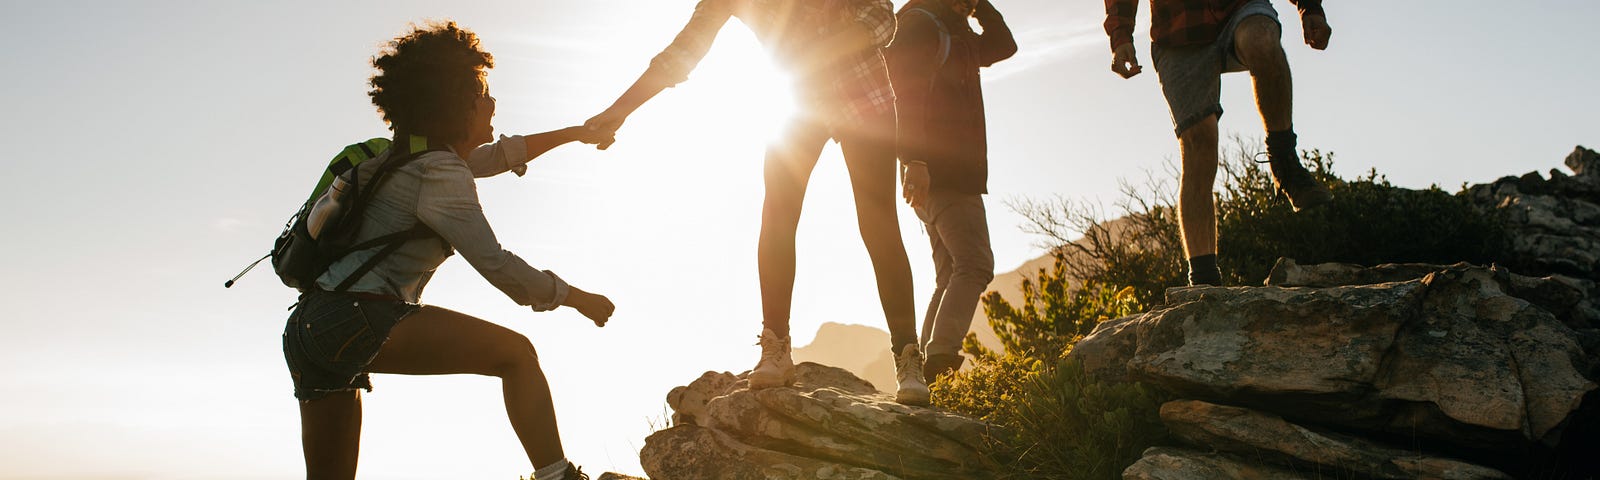 Four adults out hiking together at sunset. Three of them are standing on a low boulder. One of them is holding the hand of the fourth, supporting them as they climb onto the boulder to join the others. All of them are looking happy to be there.